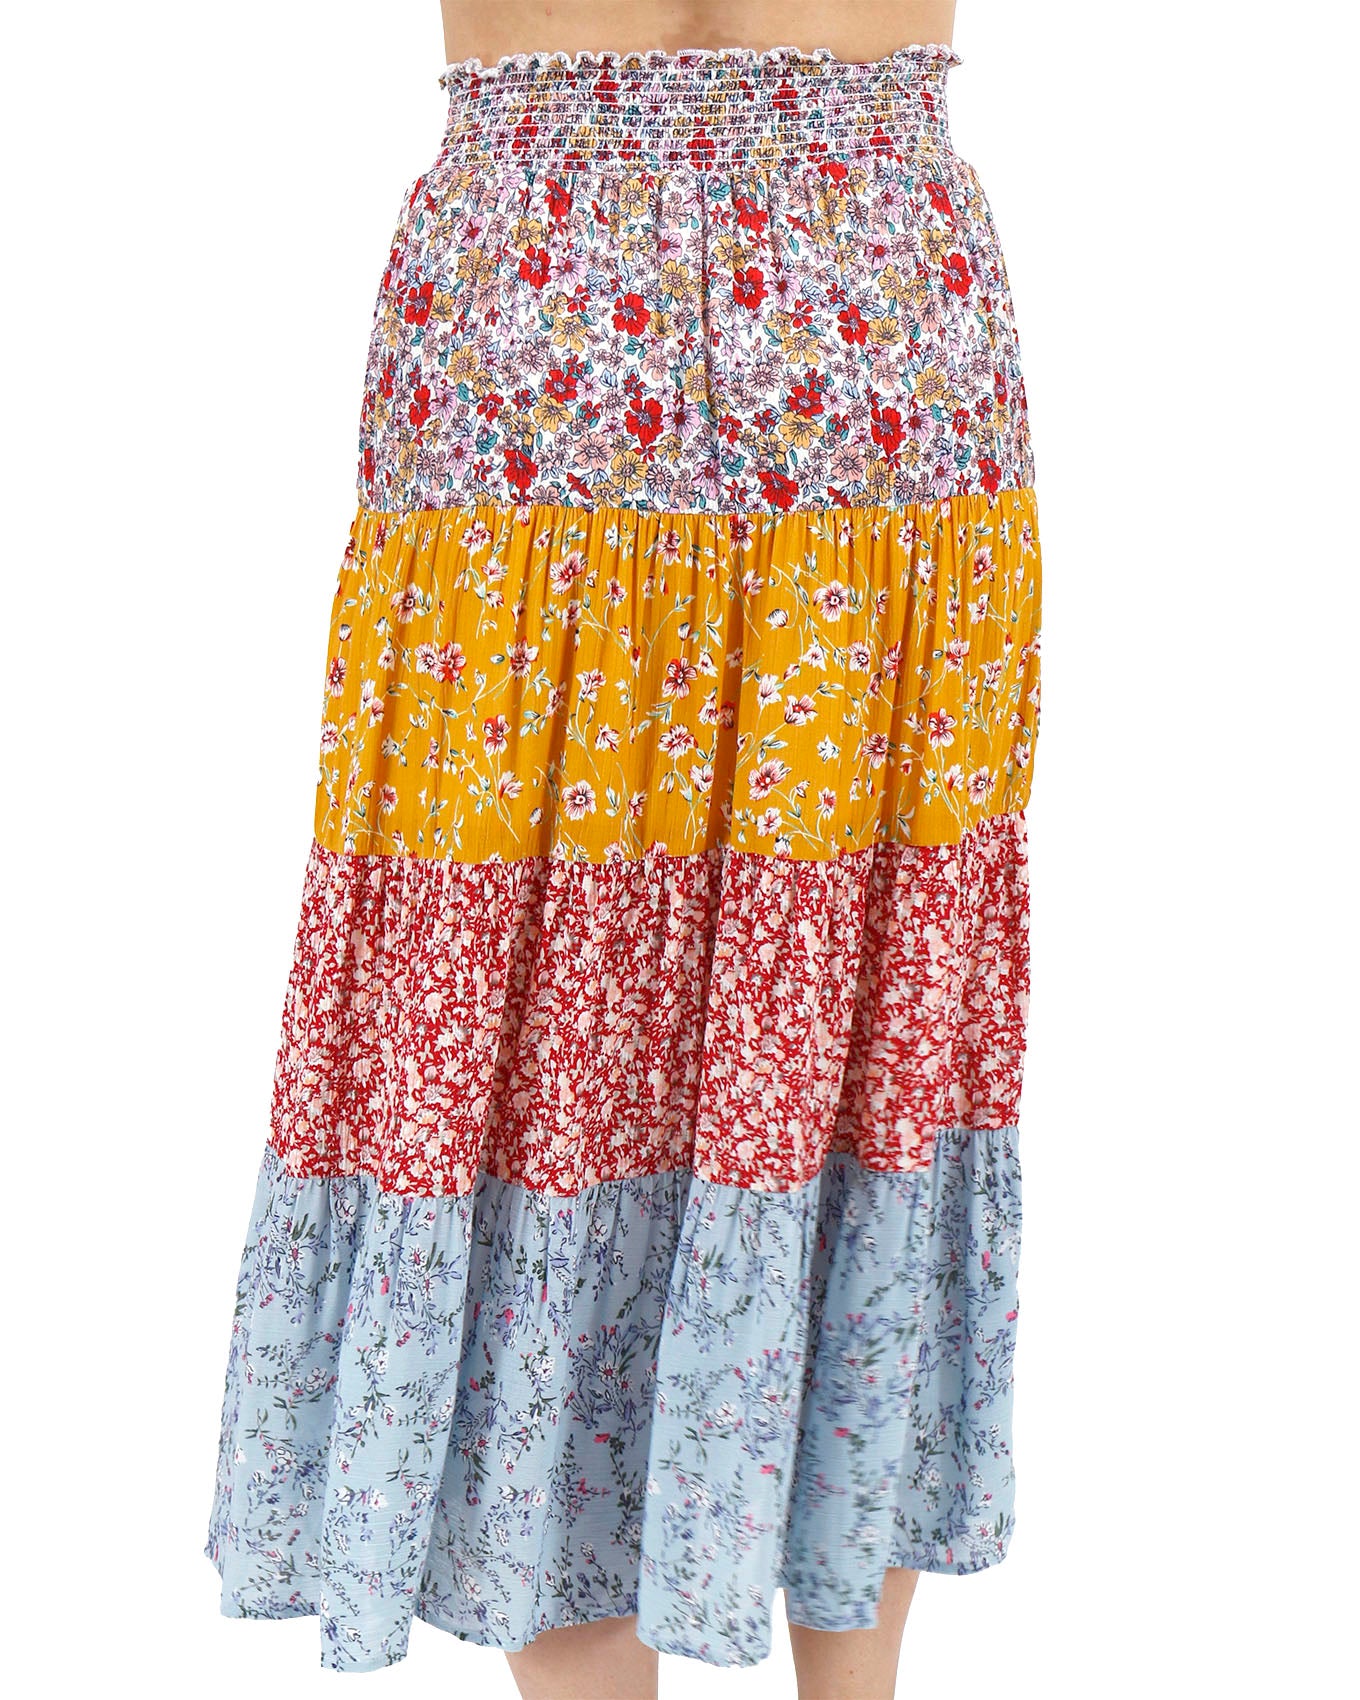 Back stock shot of Floral Patchwork Go-To Tiered Skirt